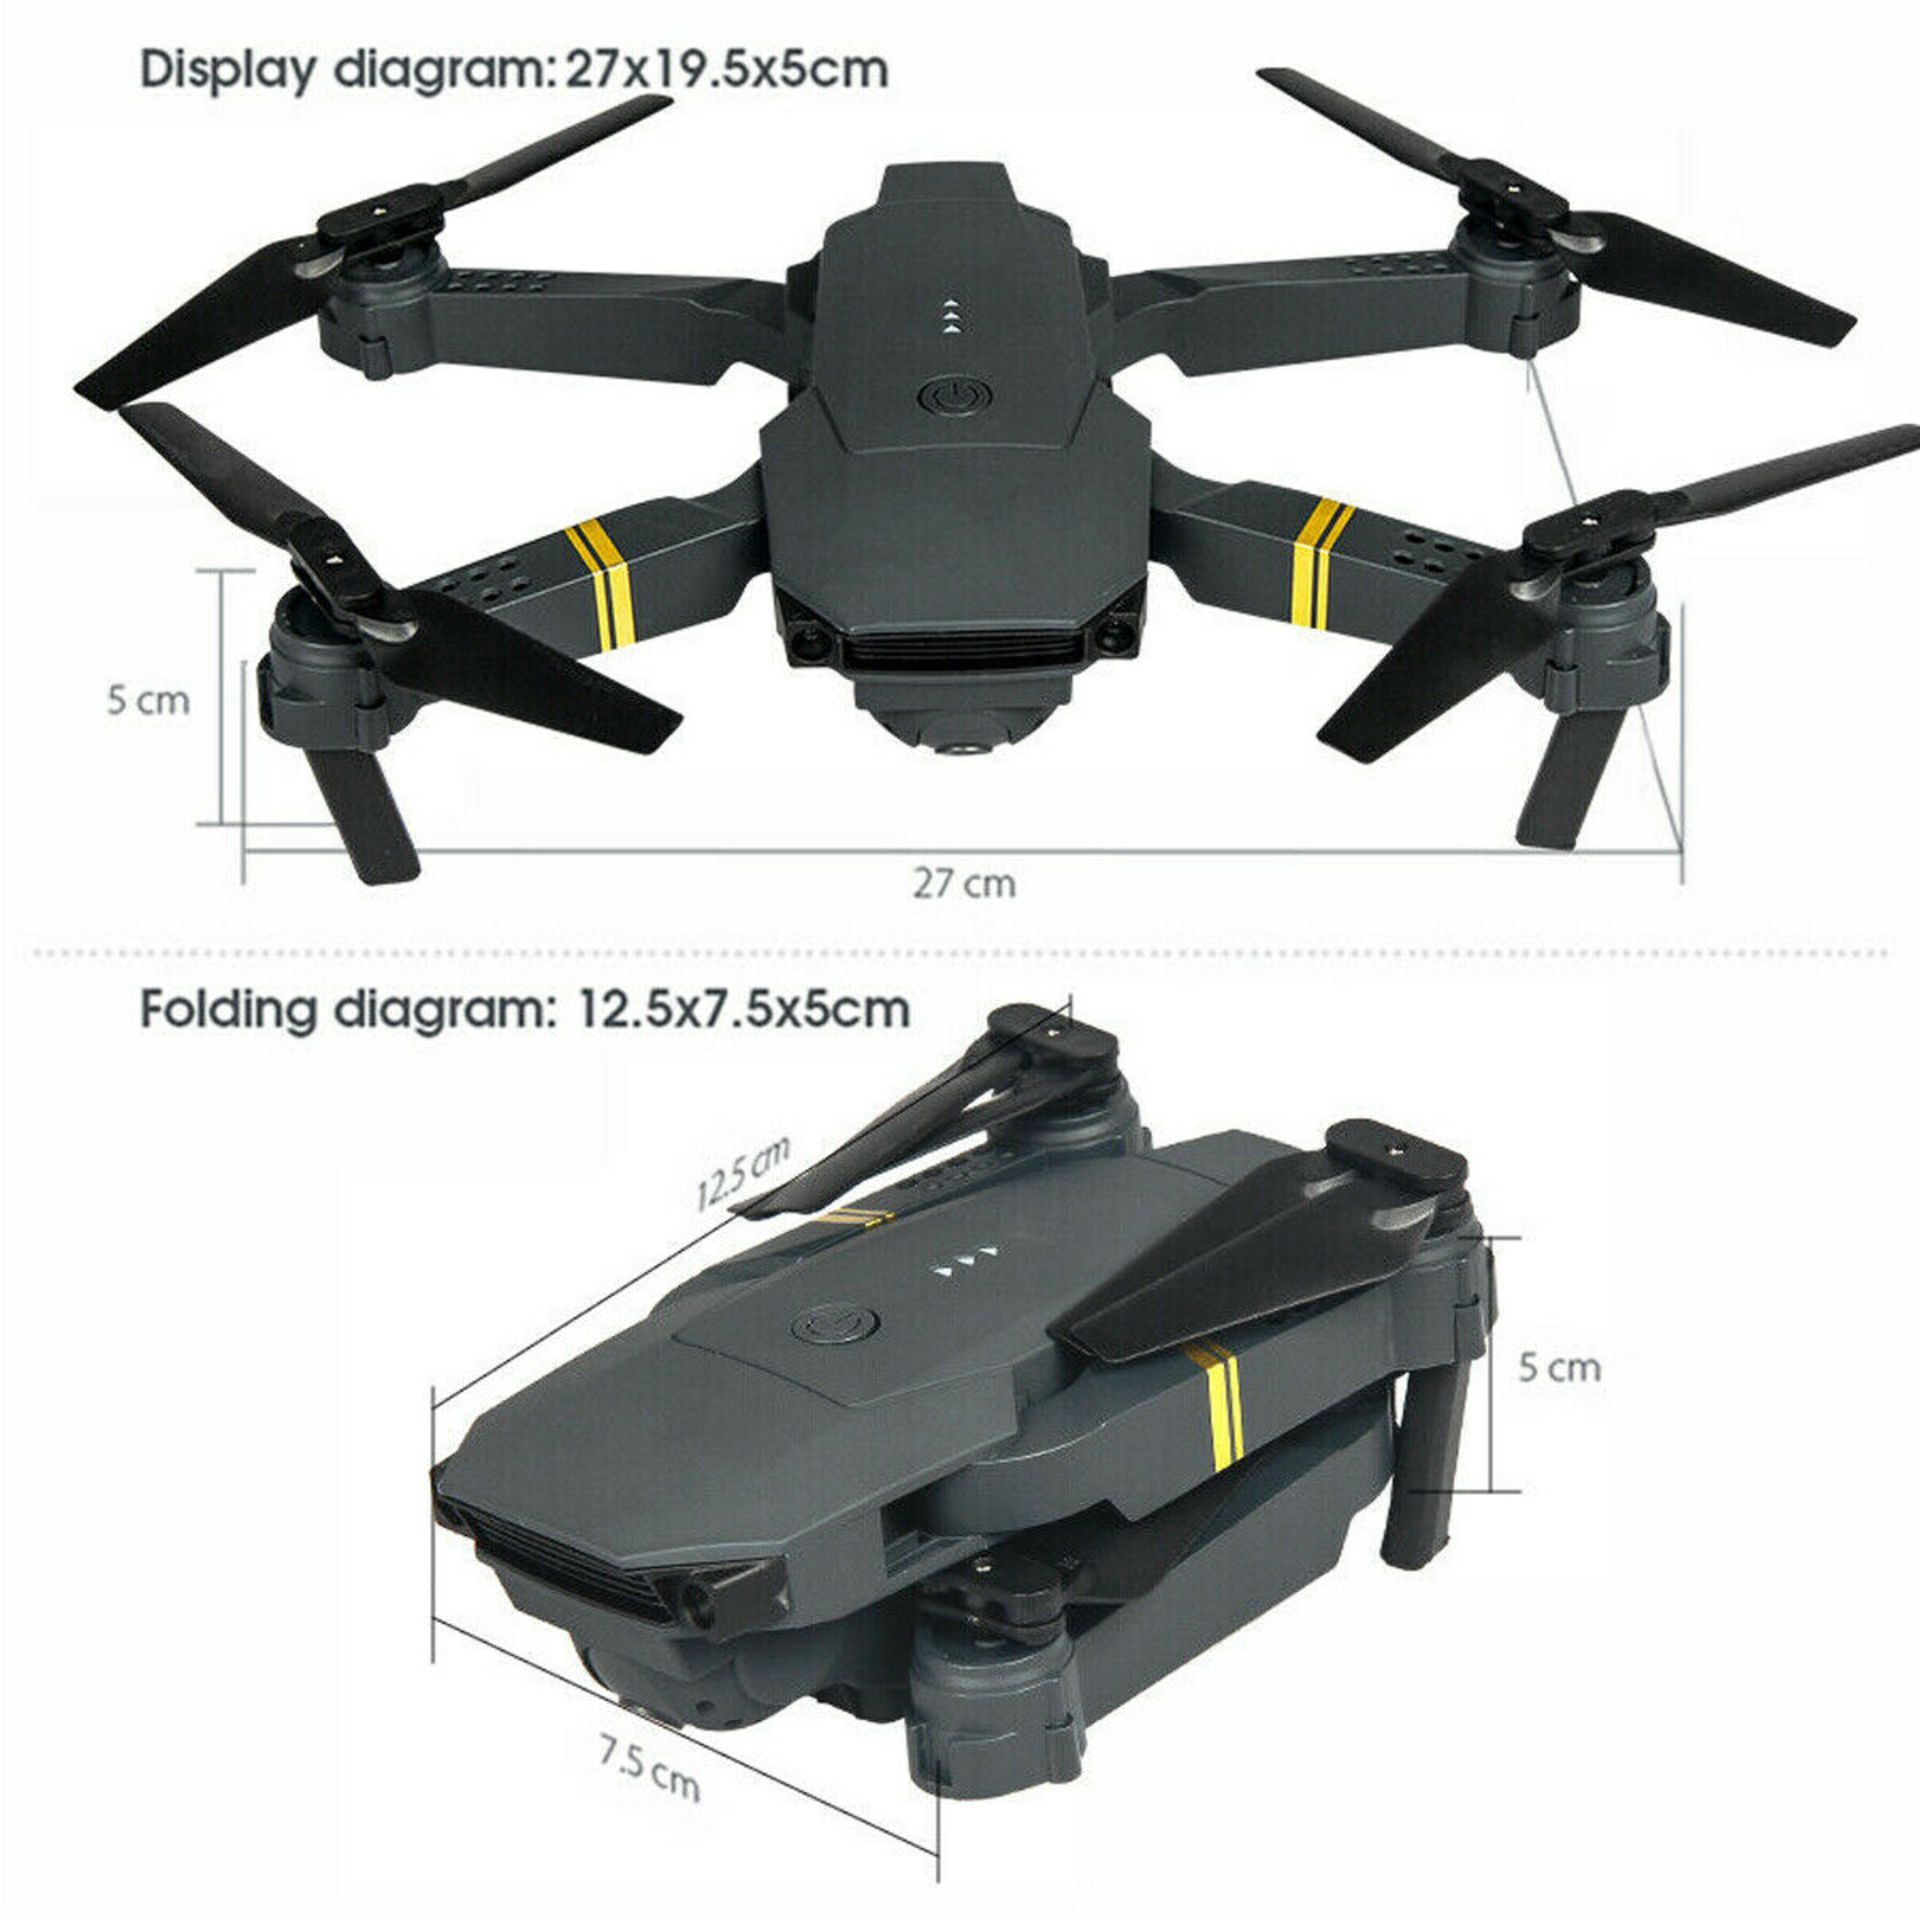 NEW & UNUSED DRONE X PRO WIFI FPV 1080p HD CAMERA FOLDABLE RC QUADCOPTER + CASE/ BAG *NO VAT* - Image 2 of 11